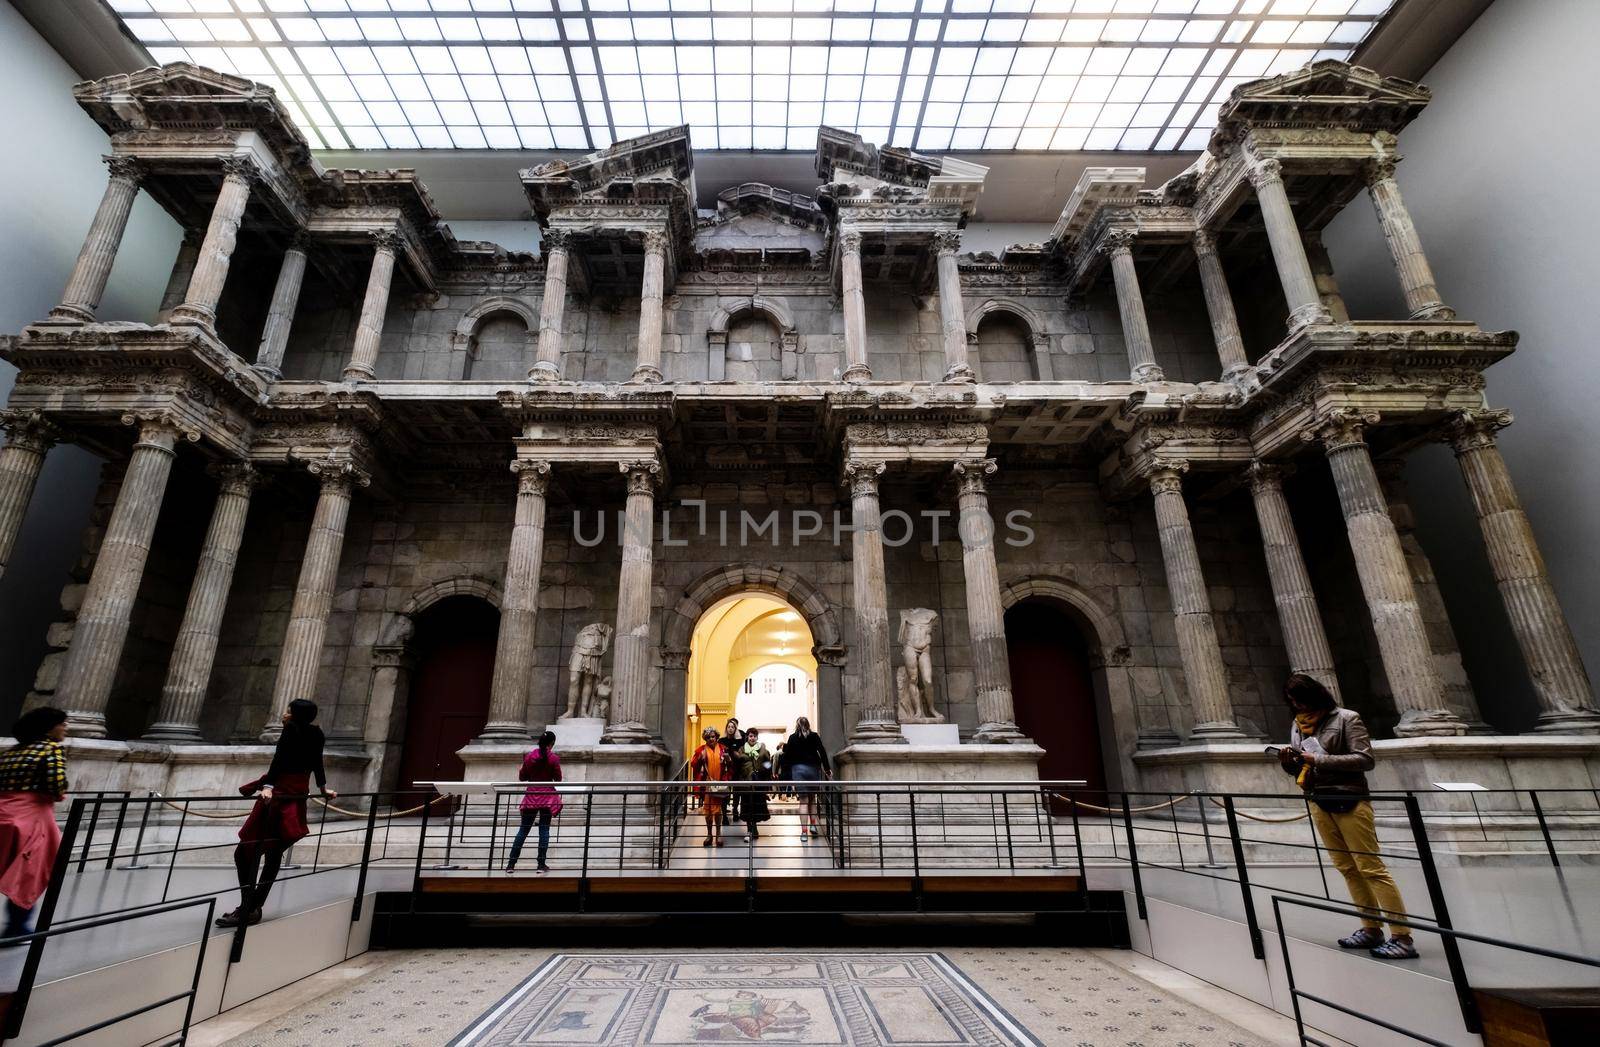 Market gate of Miletus in Pergamonmuseum in Berlin, Germany. Most visiting touristic landmark building. Ancient art architecture in Europe